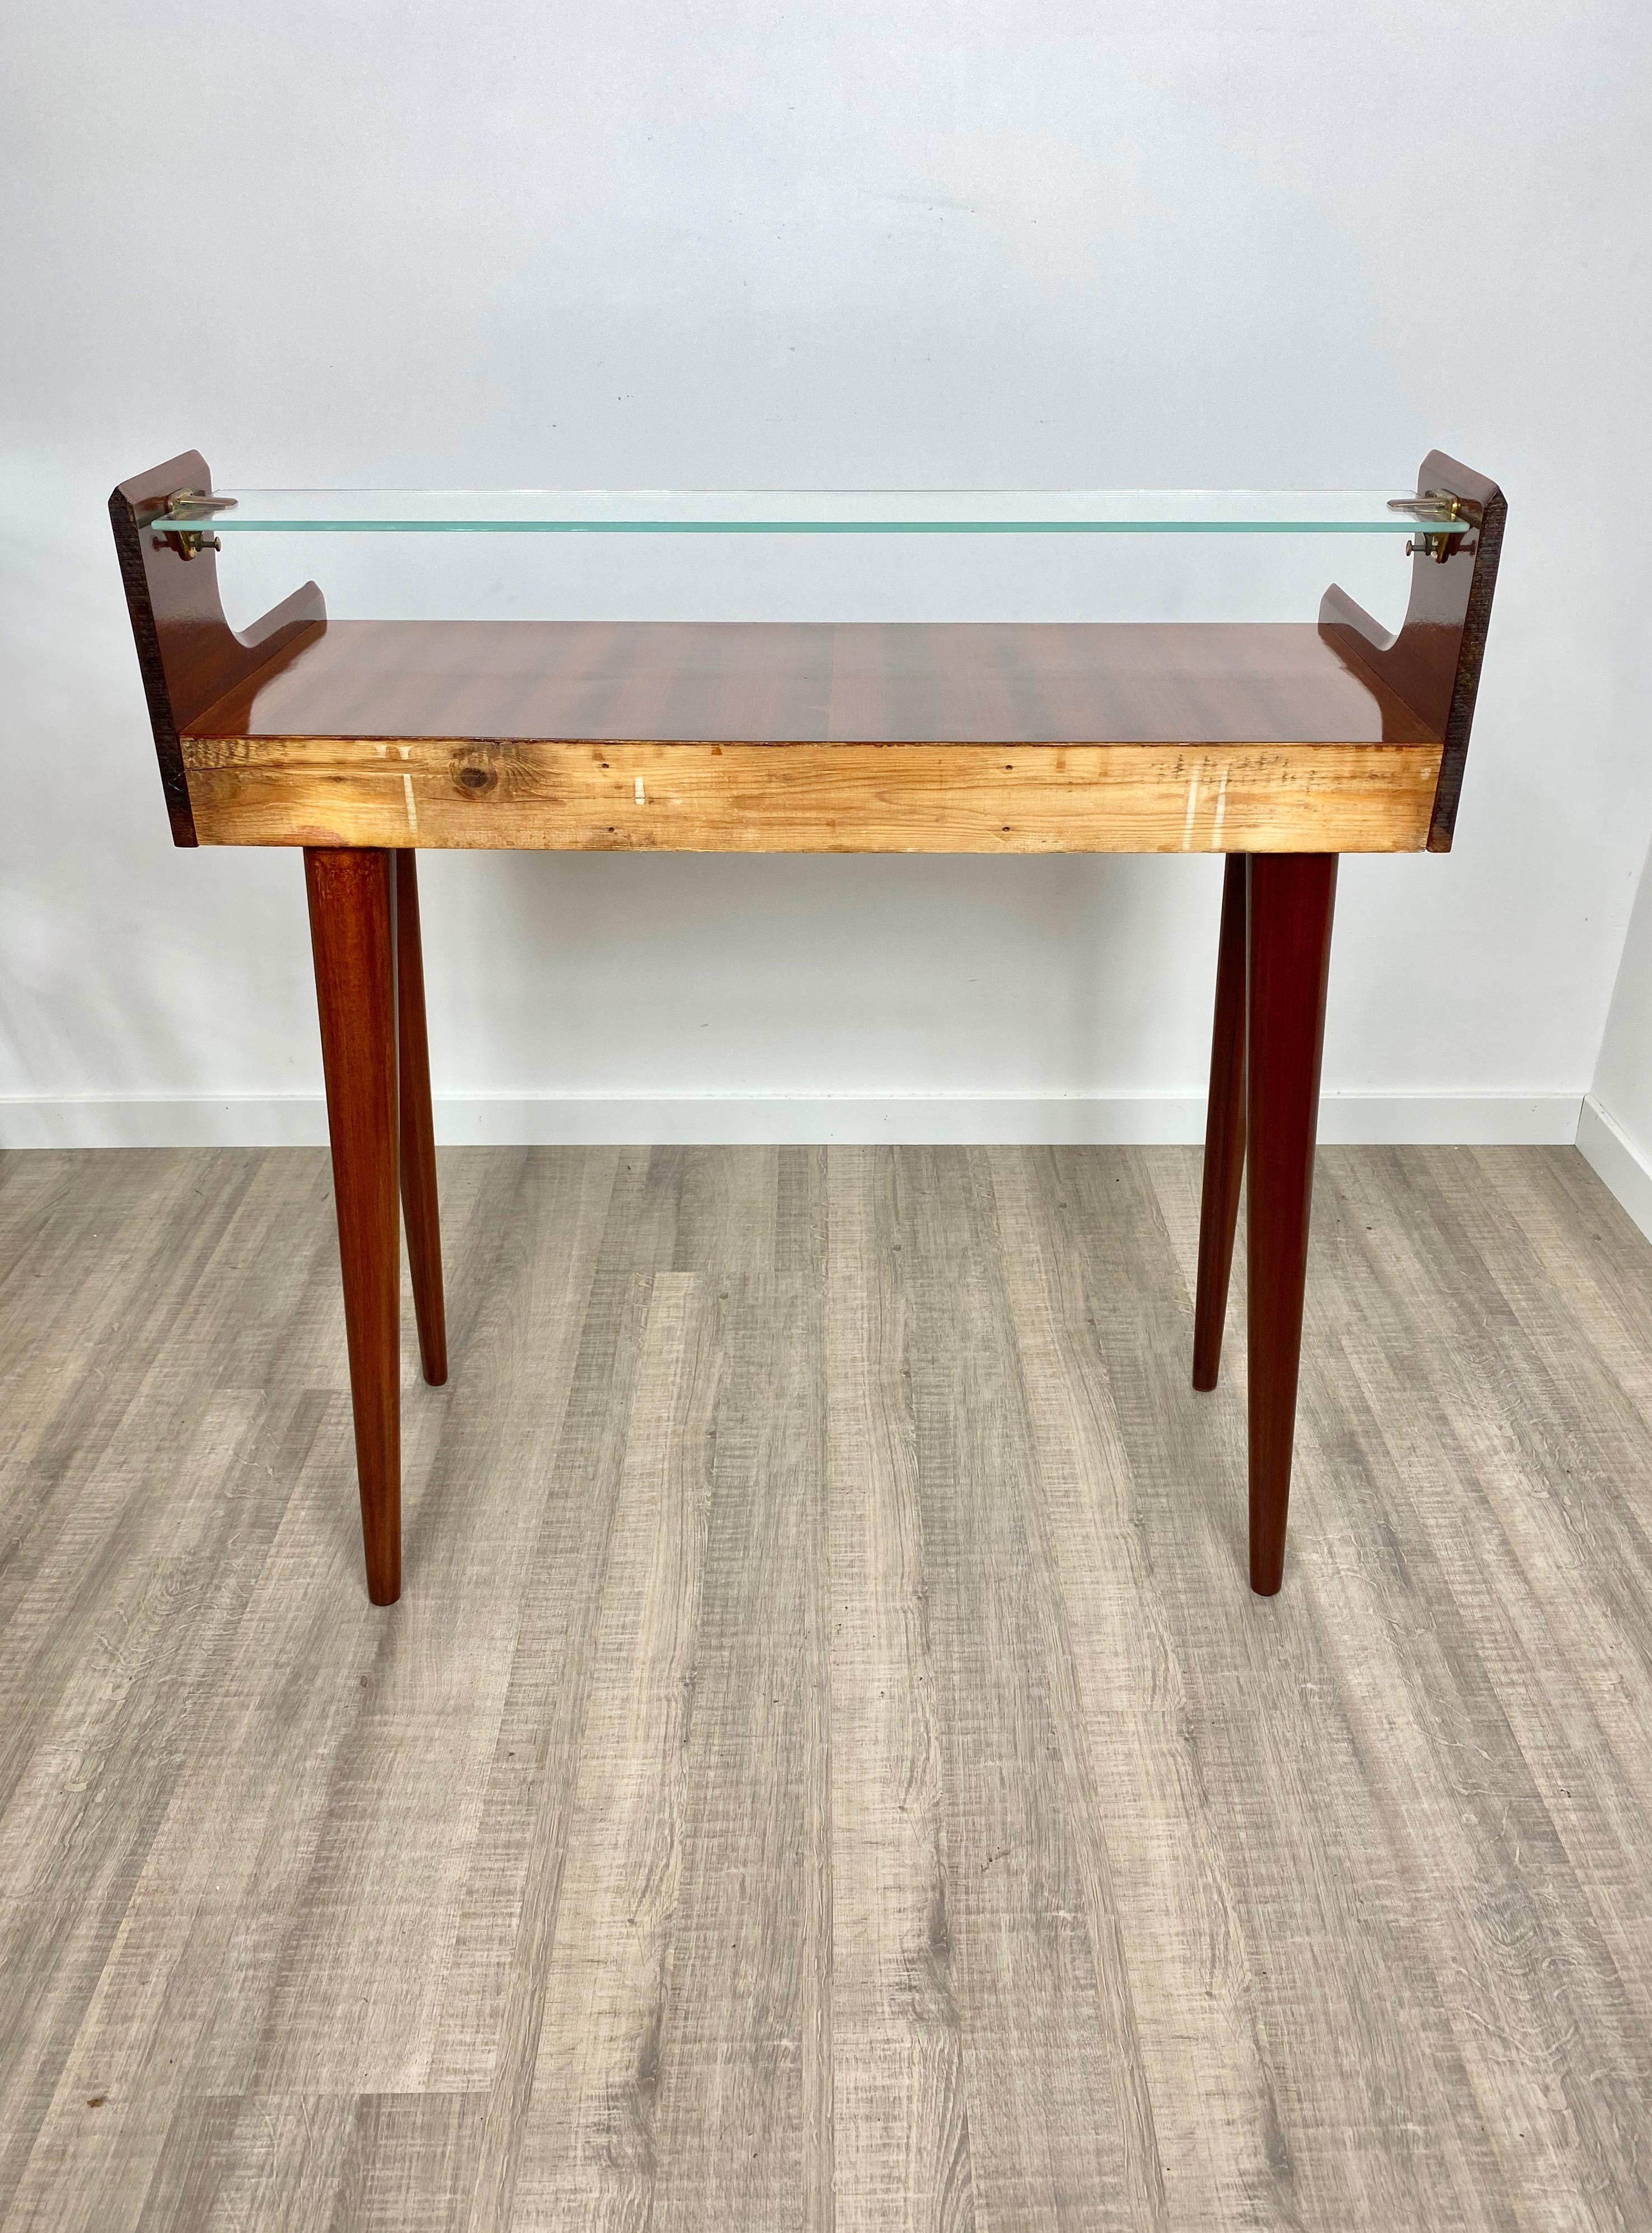 Italian Midcentury Mahogany Wood and Glass Console Table by Carlo de Carli 1950s For Sale 7